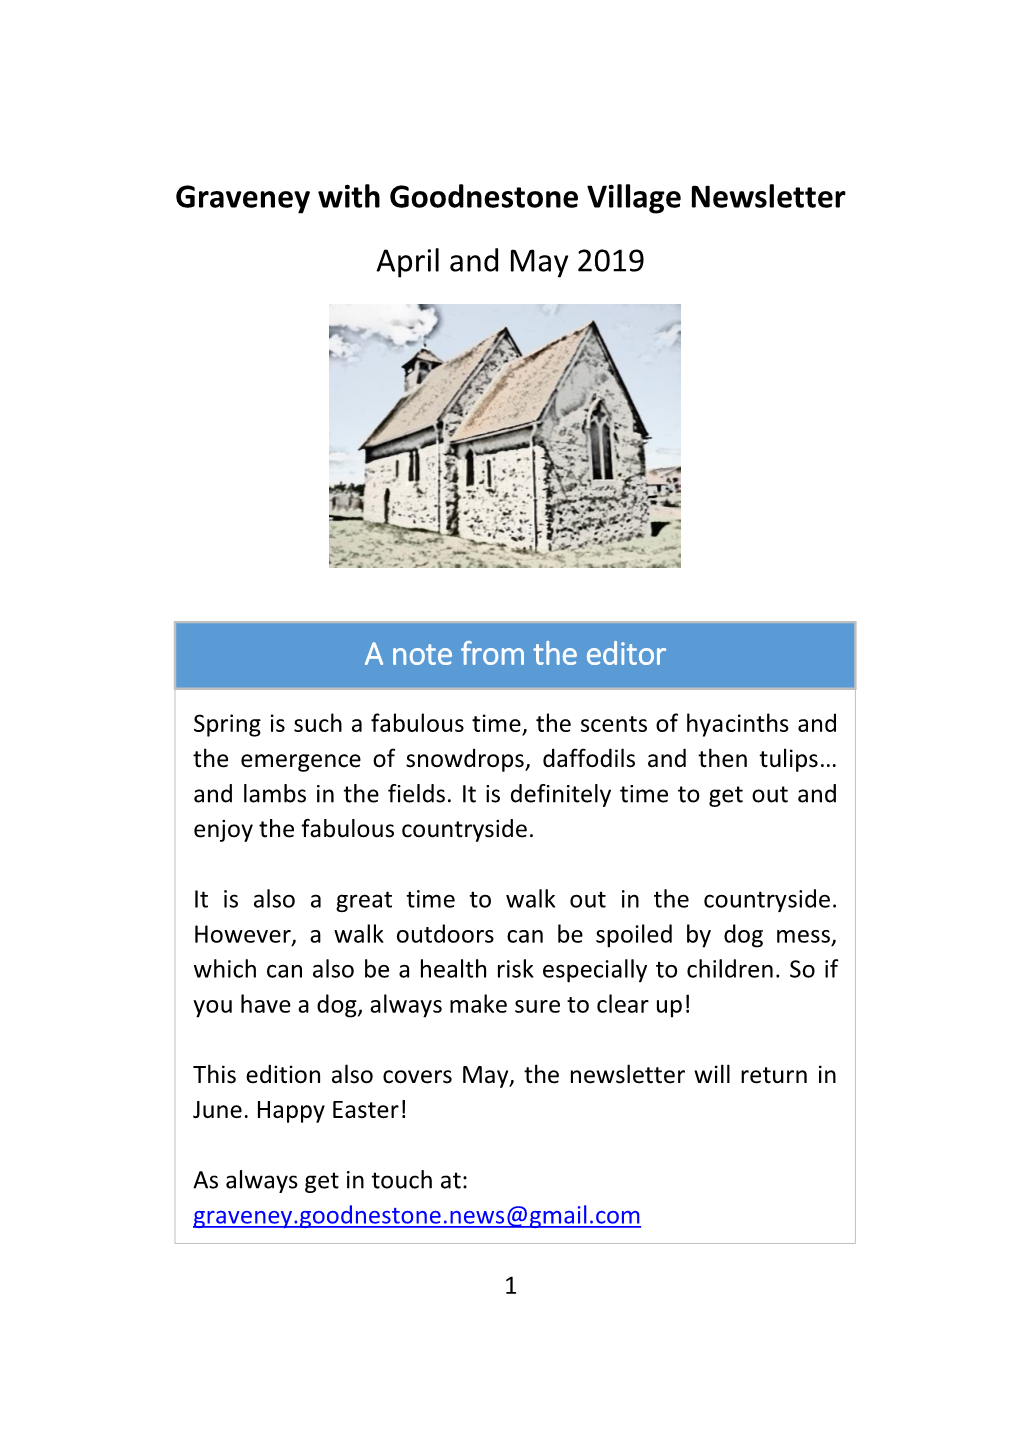 Graveney with Goodnestone Village Newsletter April and May 2019 a Note from the Editor